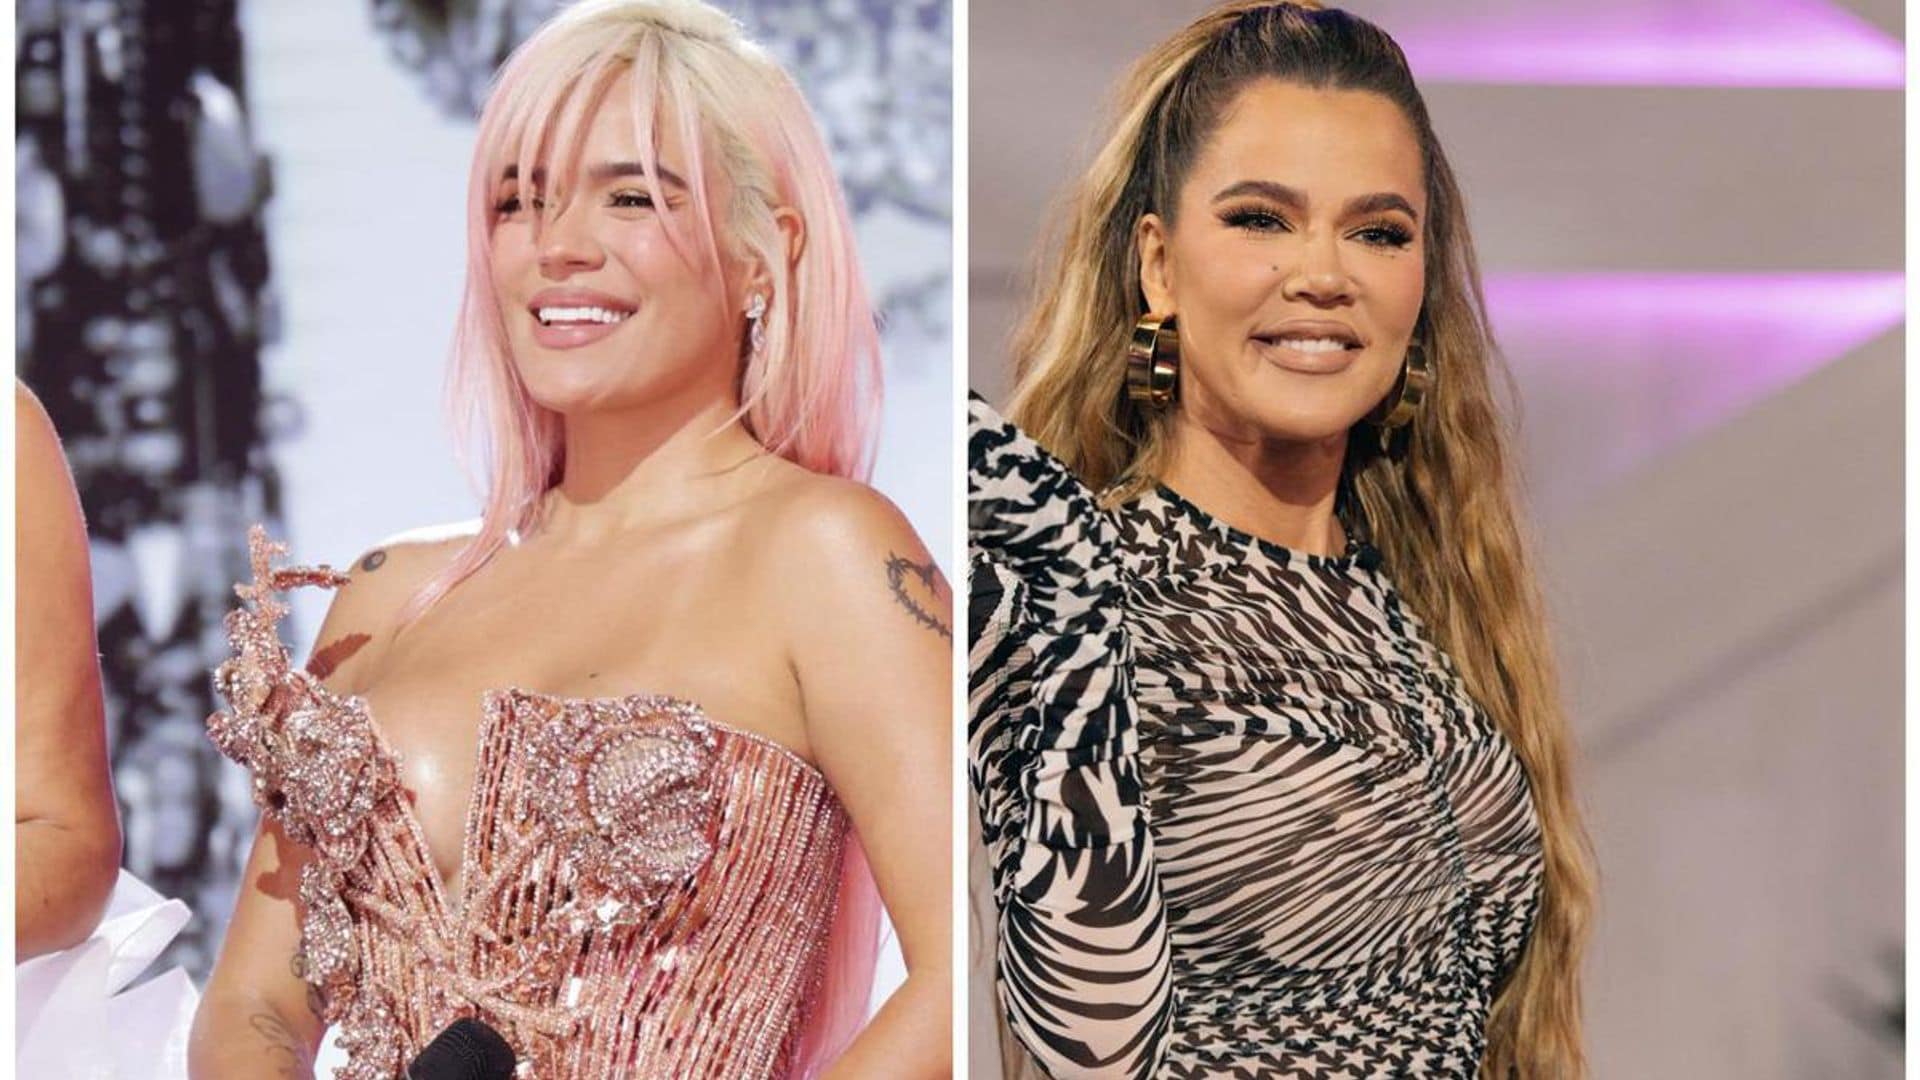 Fans think Karol G looks just like Khloé Kardashian after hairstyle transformation